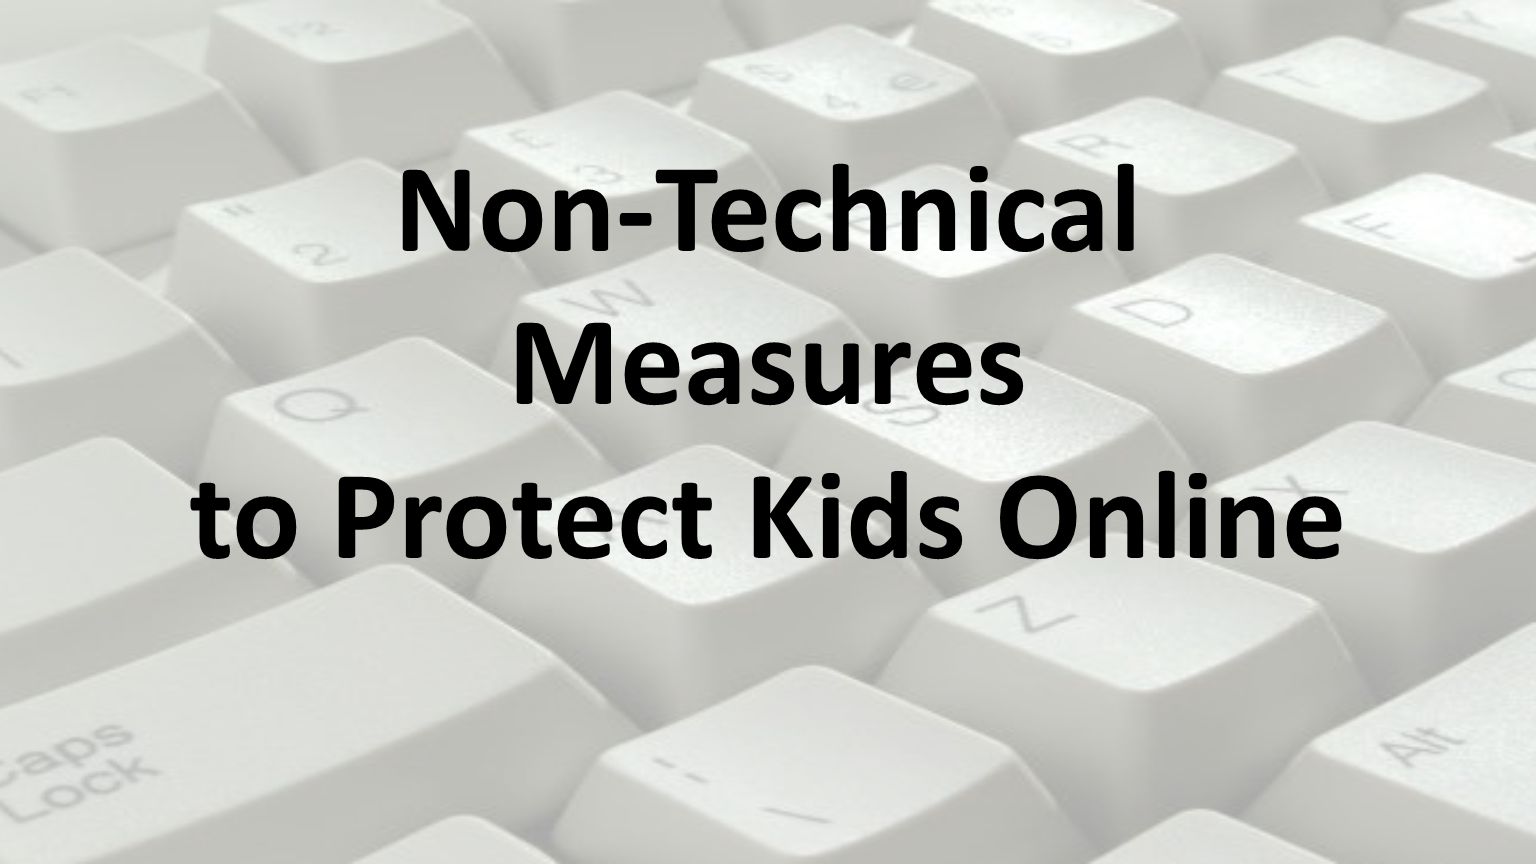 Non-Technical Measures to Protect Kids Online